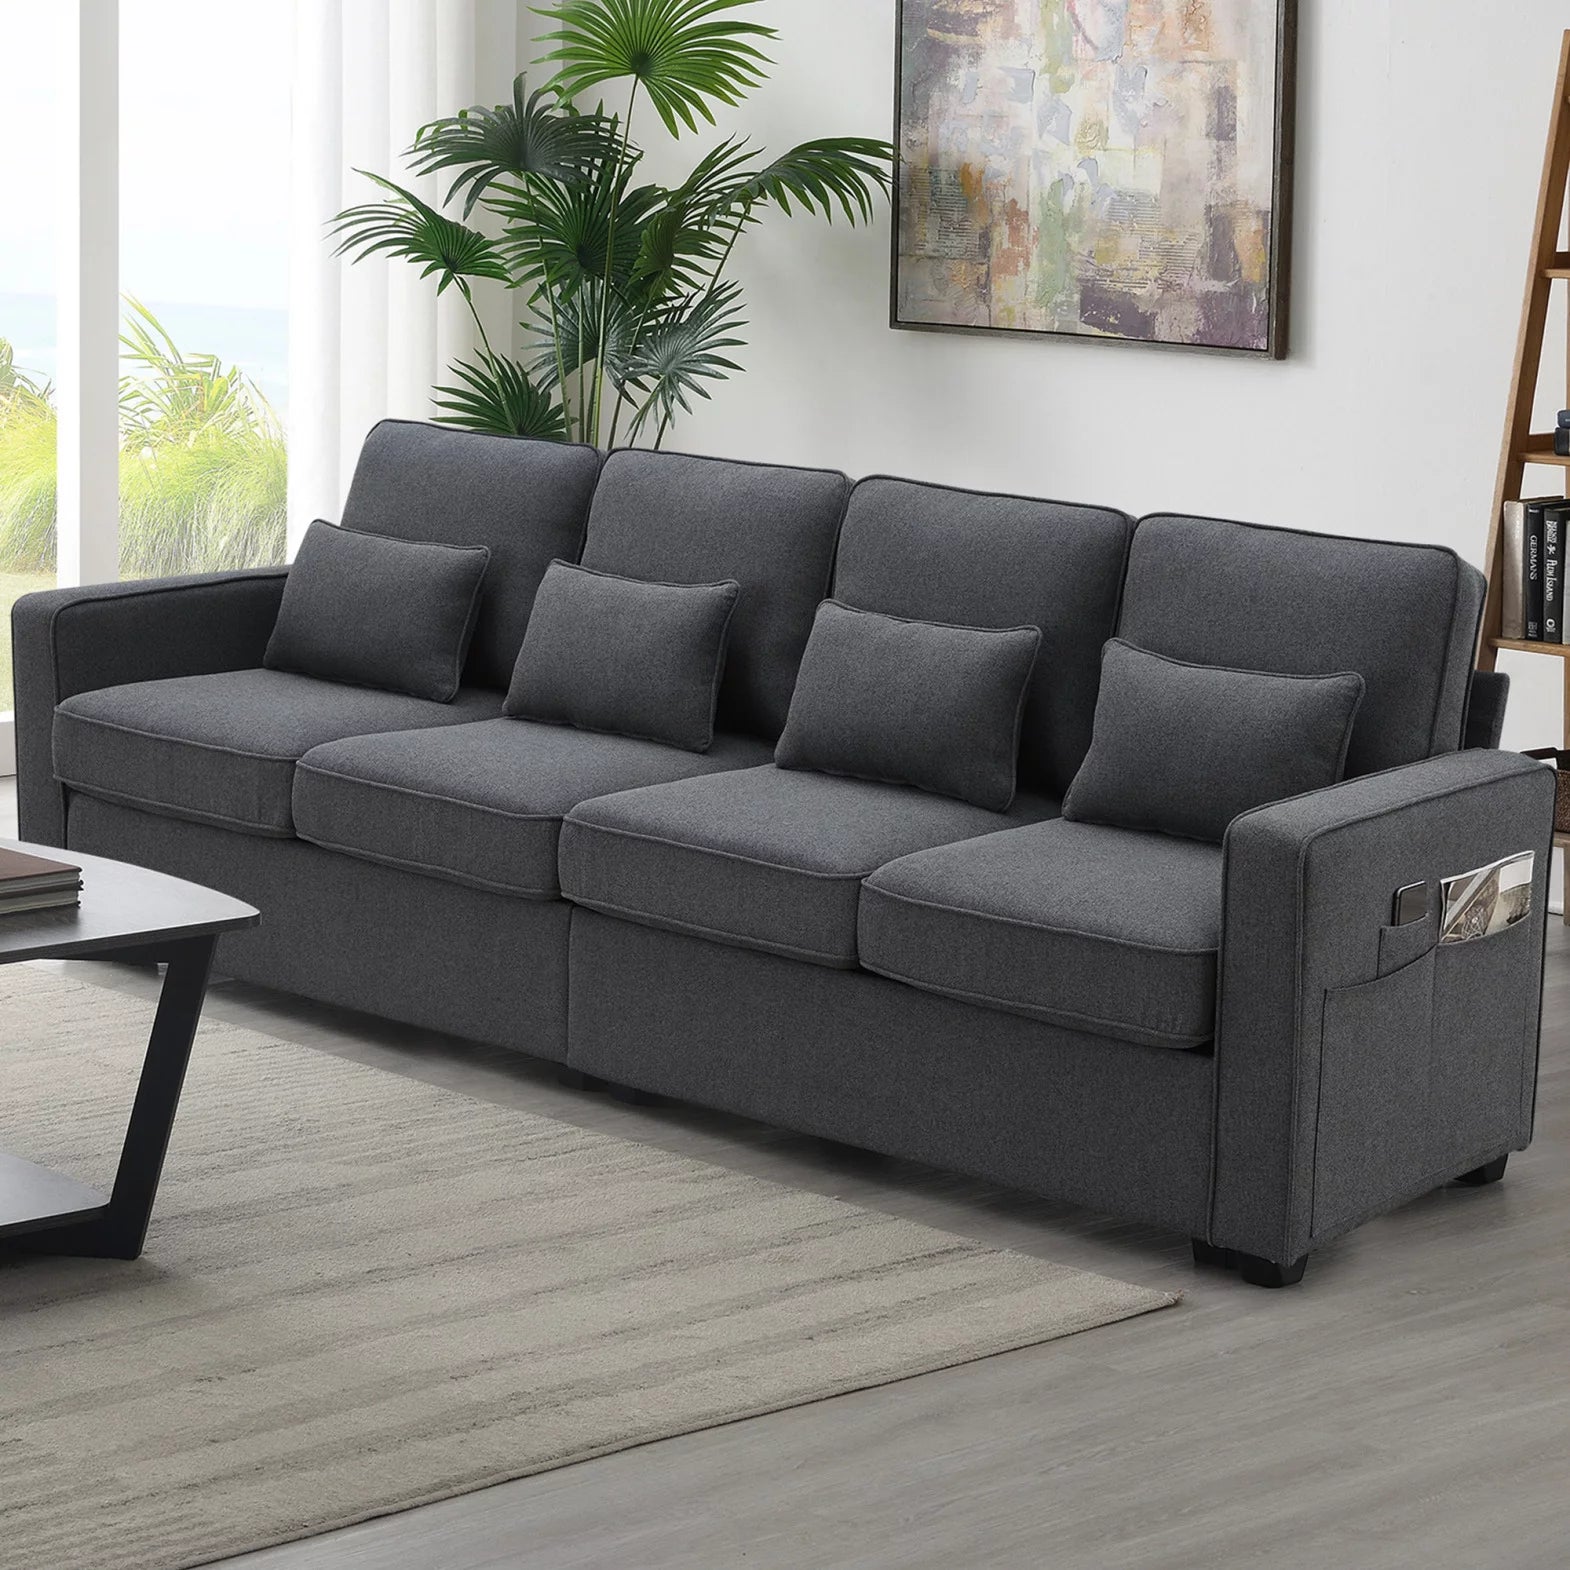 104" Accent Sofa, Modern Linen Fabric Upholstered 4-Seater Sofa with Armrest Pockets and 4 Pillows, Minimalist Style Sofa Couch with Plastic Legs for Living Room, Apartment, Office, Dark Grey